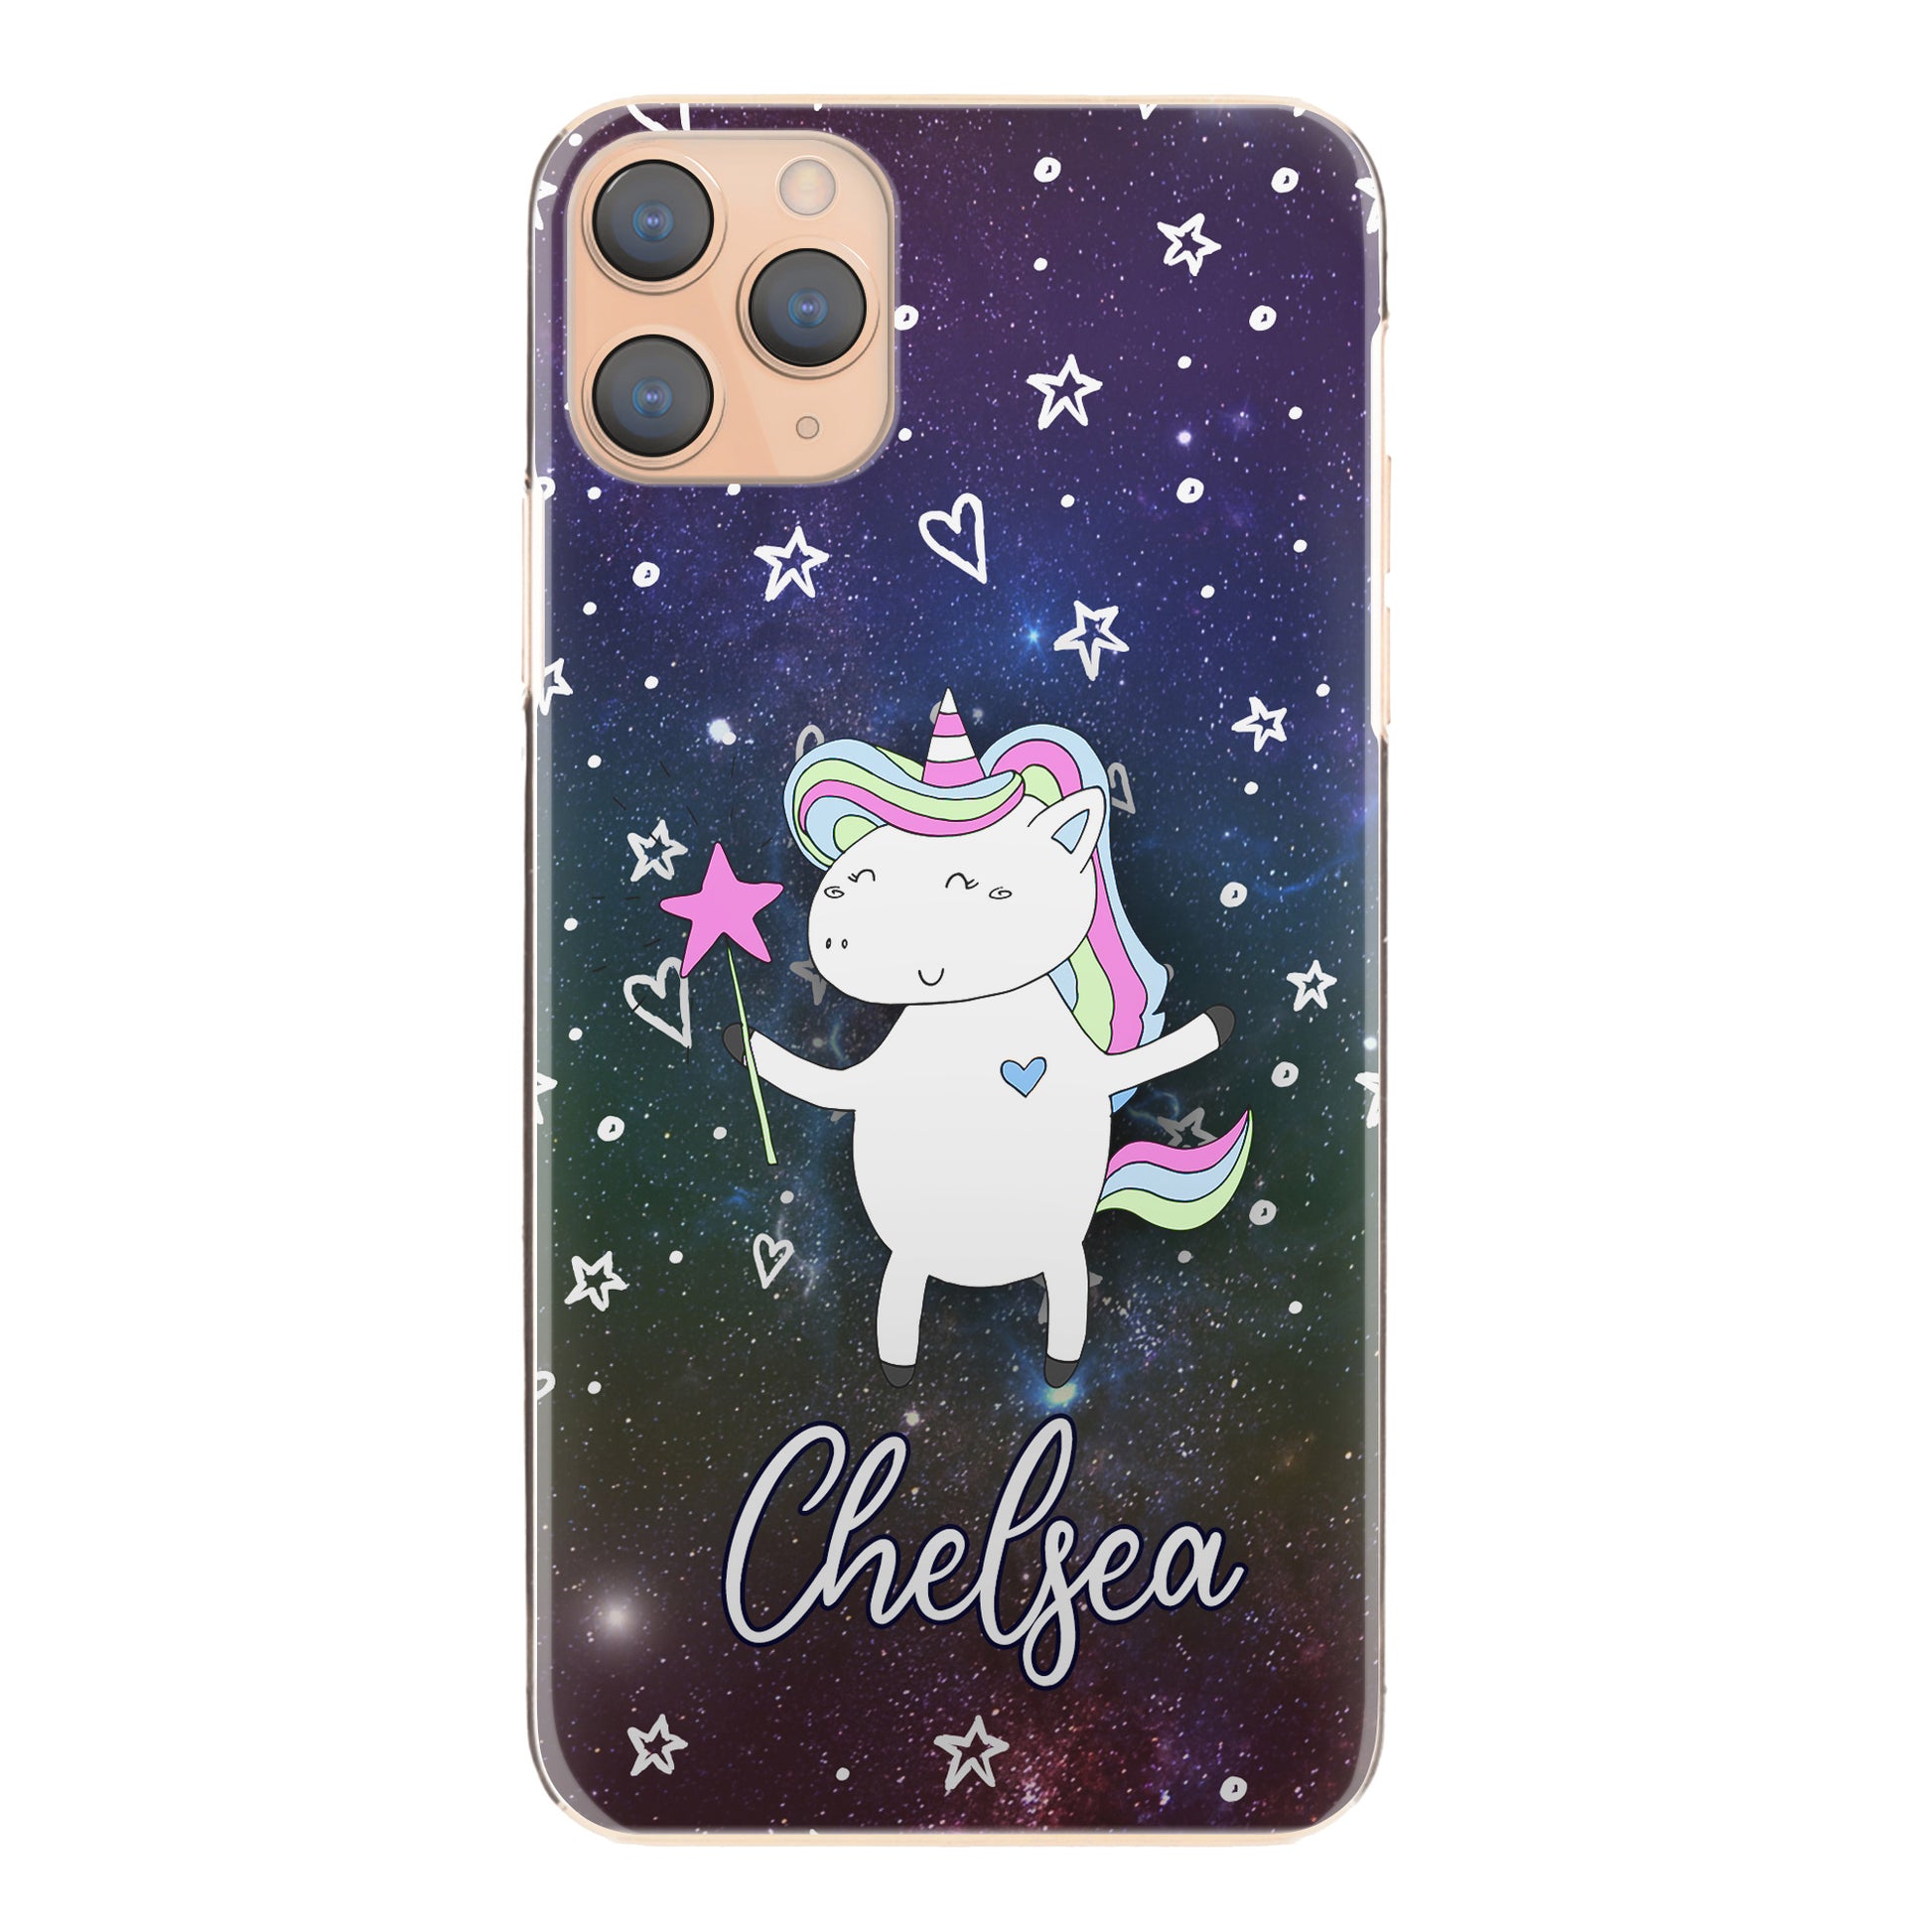 Personalised Xiaomi Phone Hard Case with Magic Unicorn and Name on Stars and Hearts Galaxy